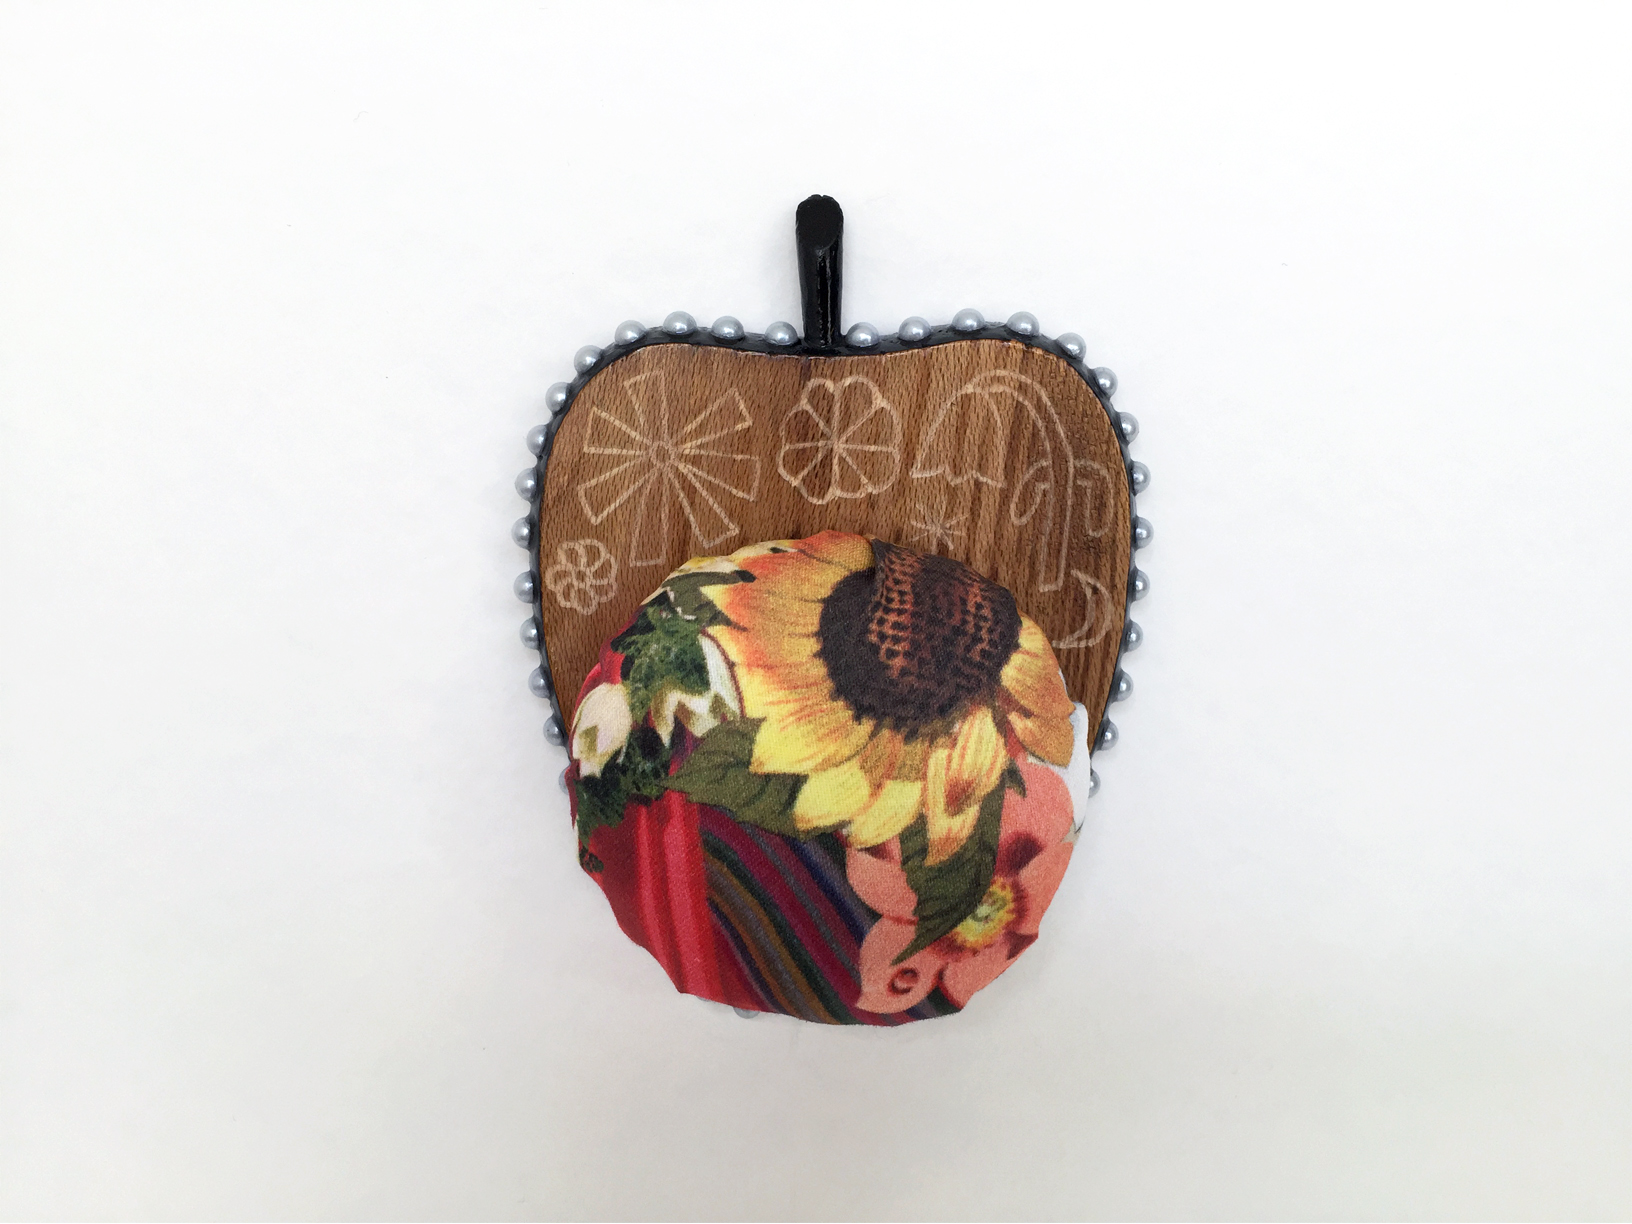 Apple Isle Pincushion #5, 2019, found wood coaster (engraved), handmade paper collage digitally printed on cotton sateen, plastic pearls, acrylic paint, resin, 120mm x 96mm